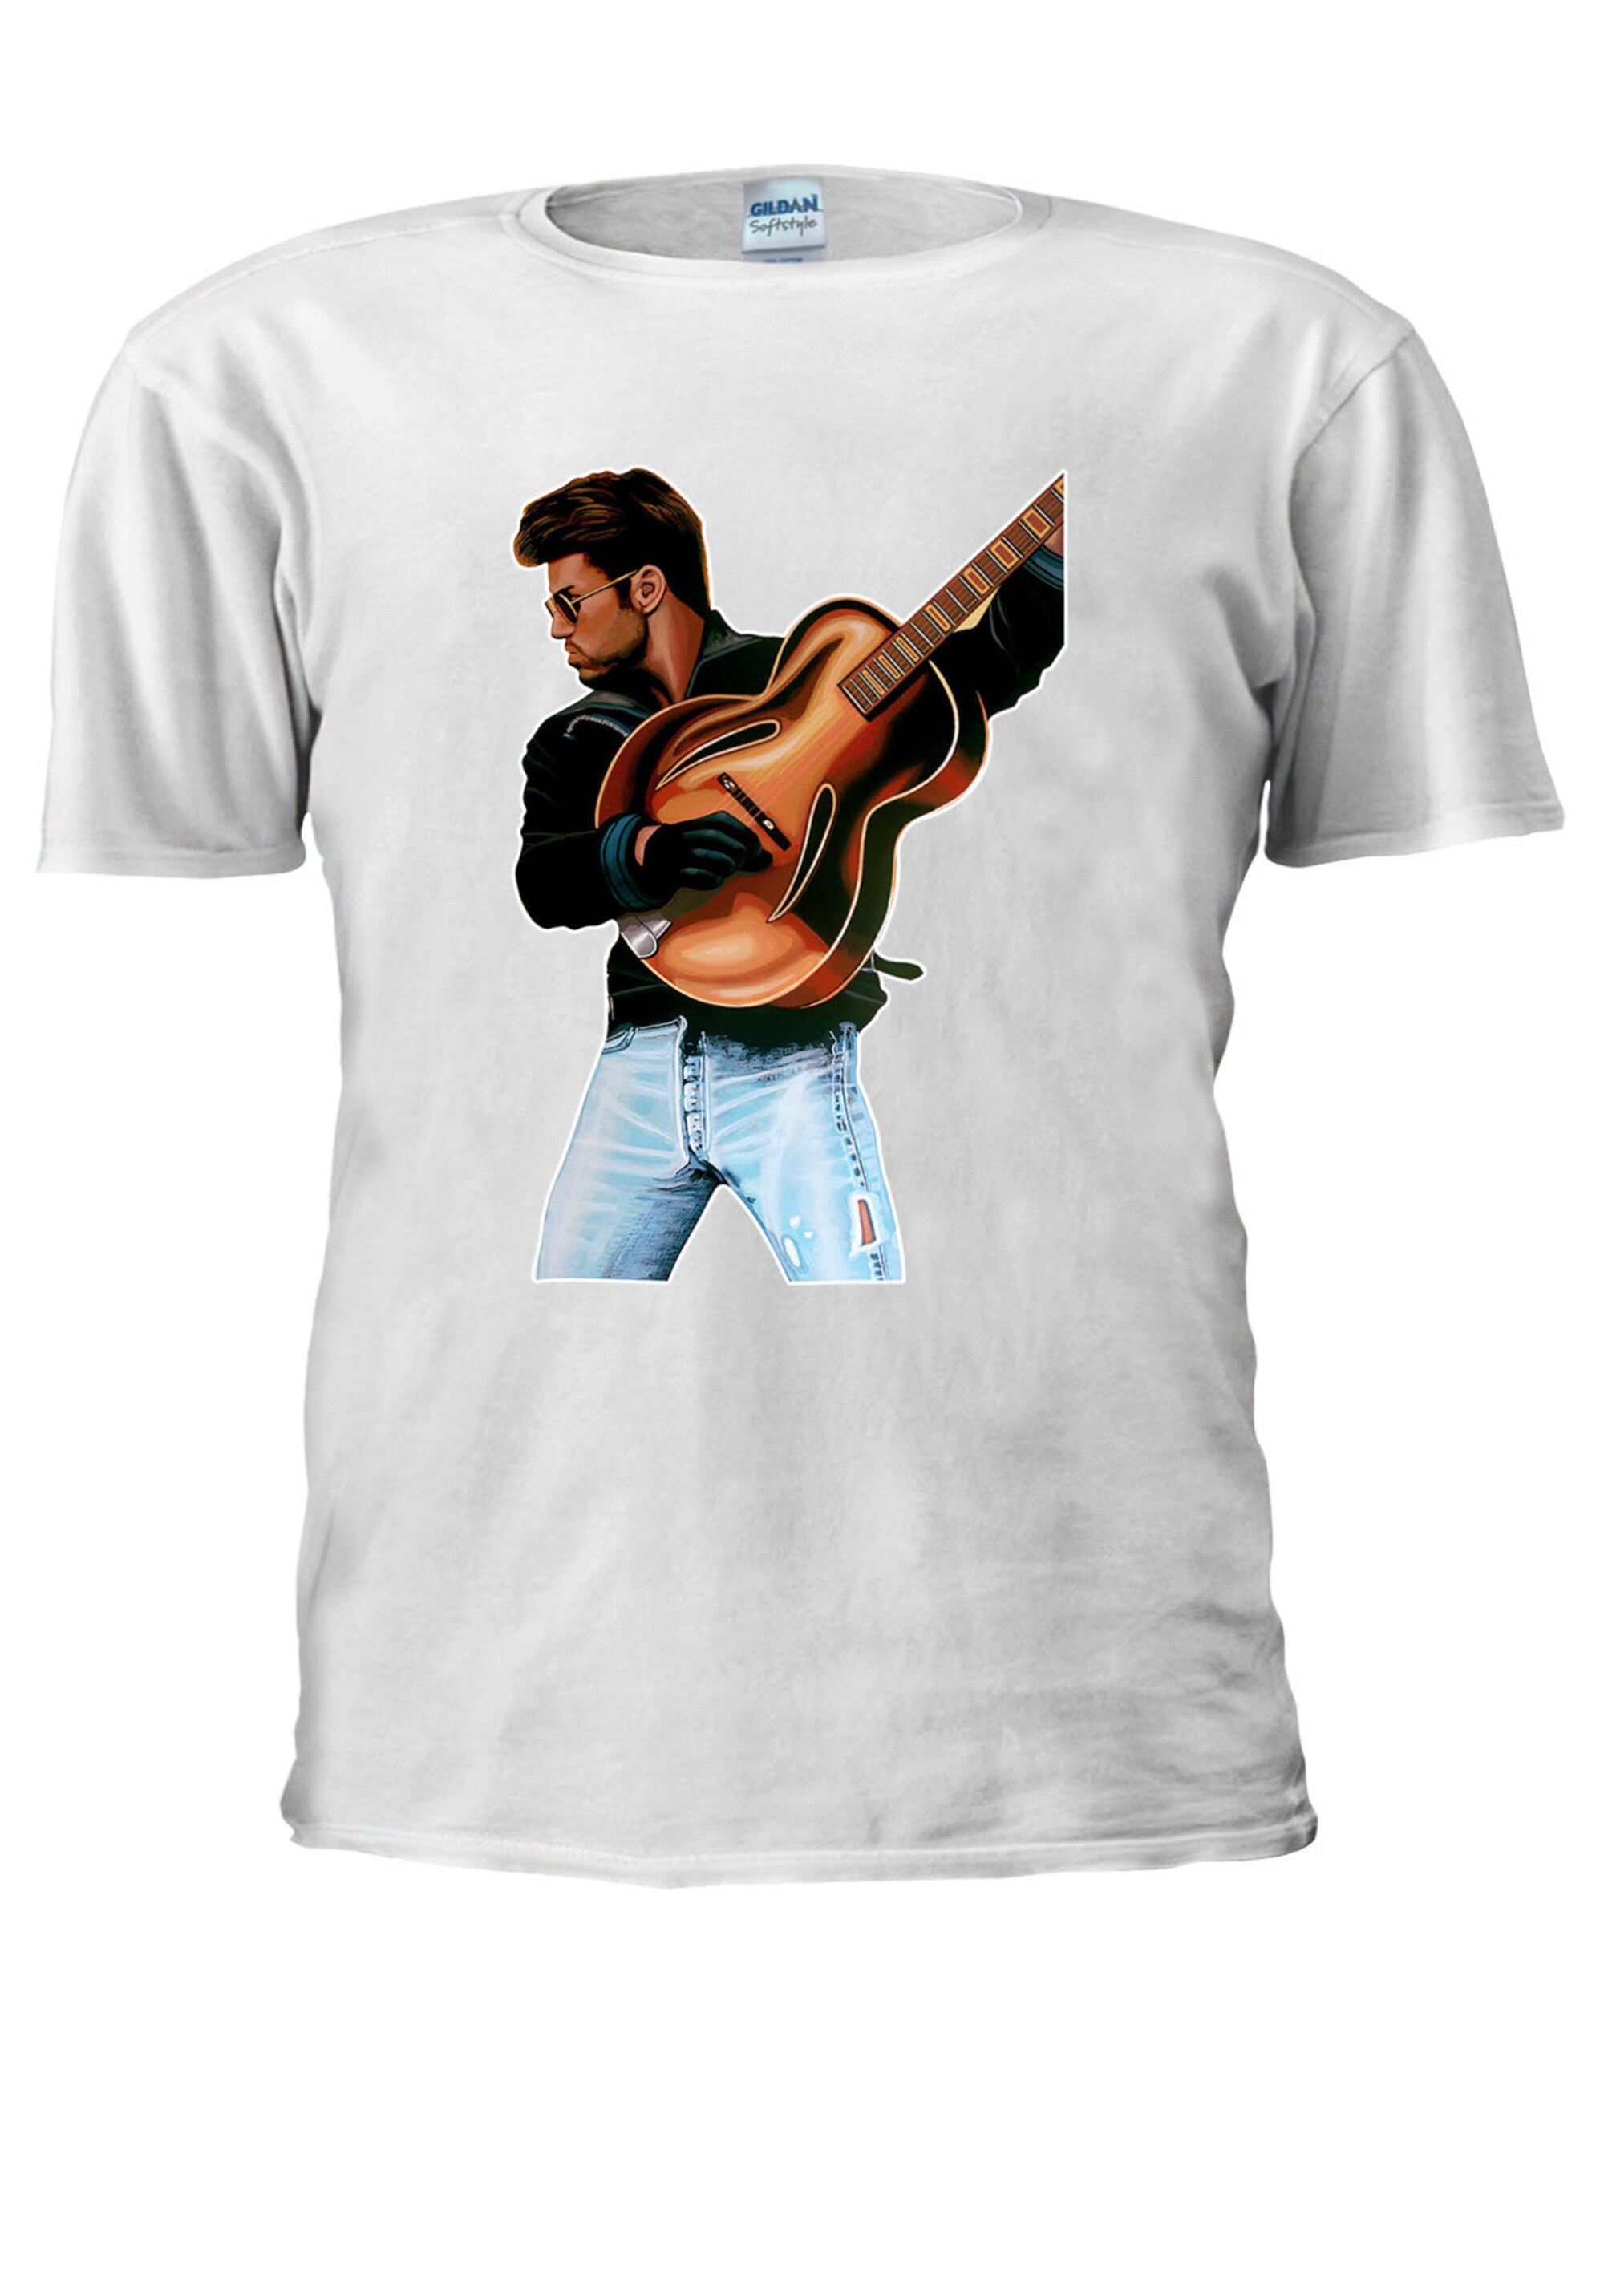 Discover George Michael T-shirt